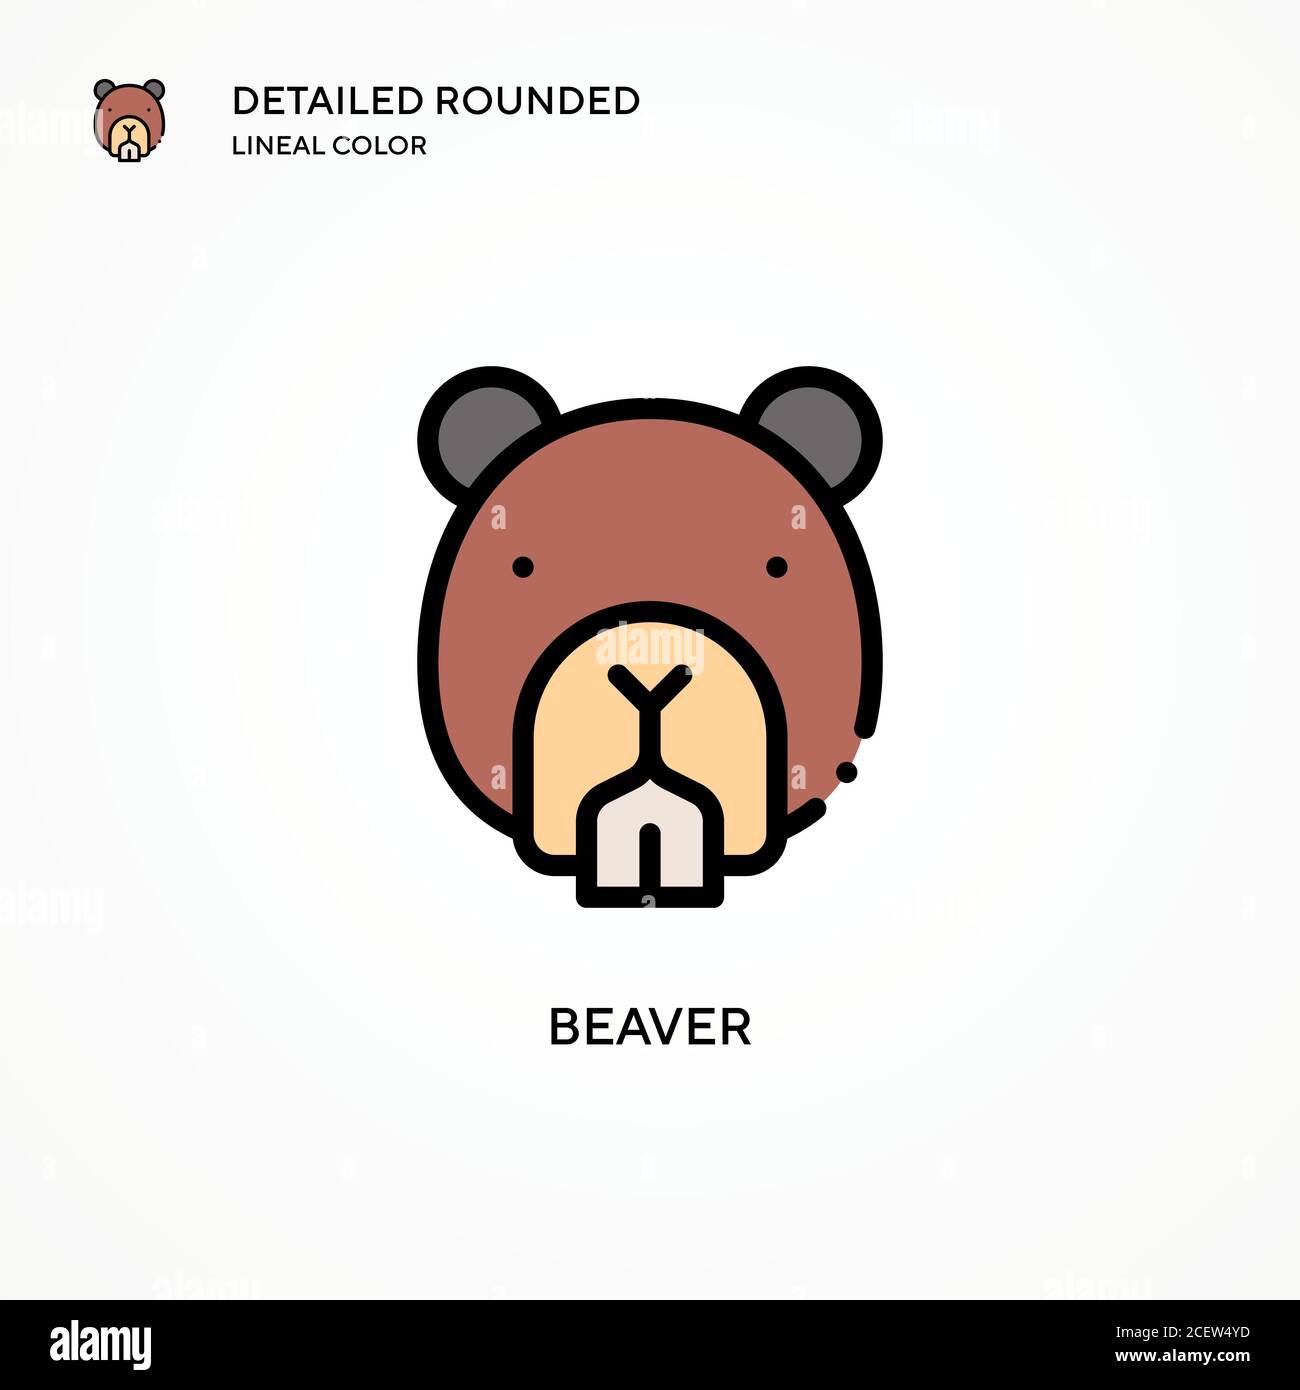 Beaver vector icon. Modern vector illustration concepts. Easy to edit and customize. Stock Vector